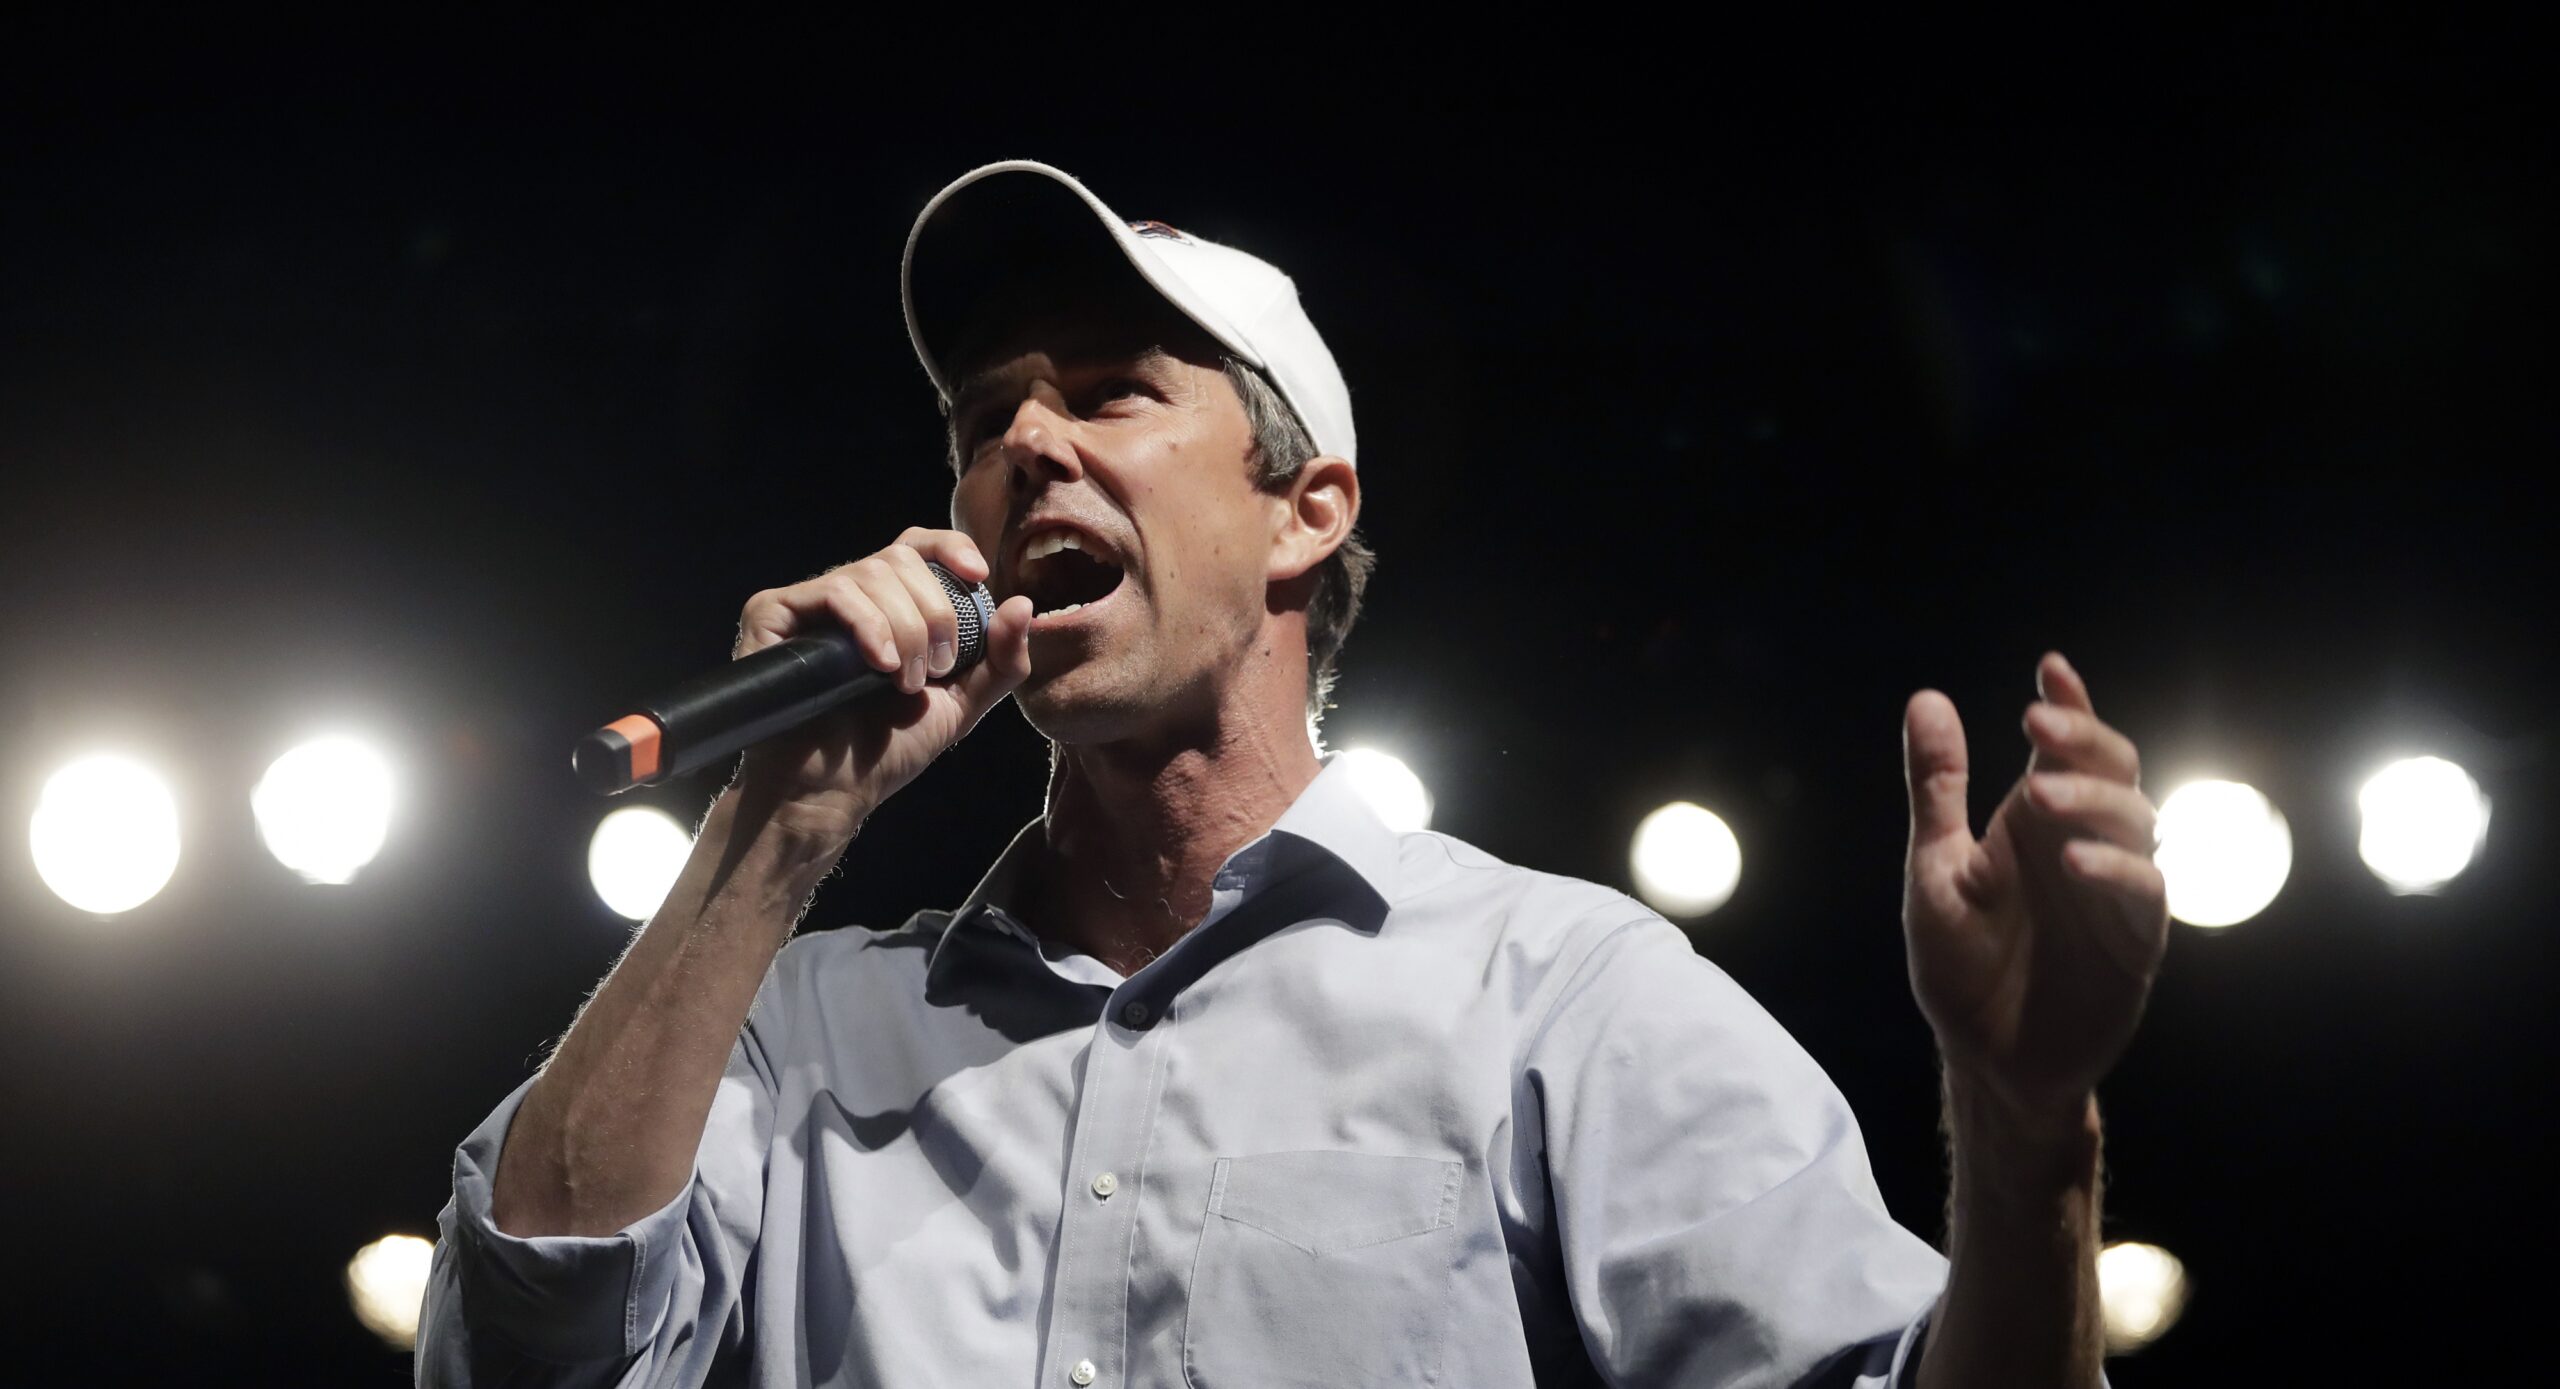 Potential 2020 Presidential Candidate O’Rourke Coming To Wisconsin